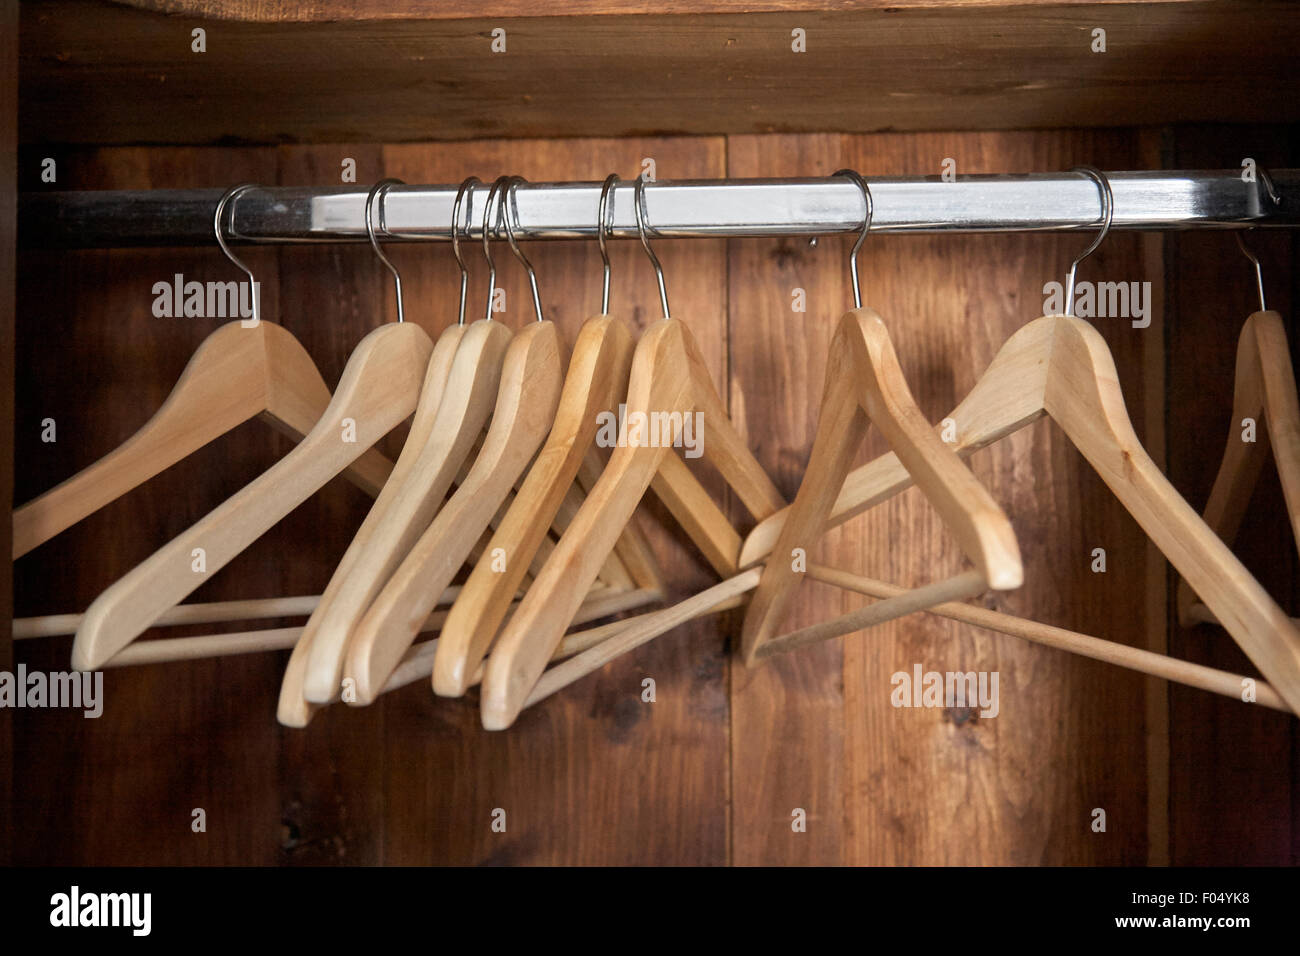 Womens Clothes On Wood Hangers On Rack Stock Photo, Picture and Royalty  Free Image. Image 92215208.